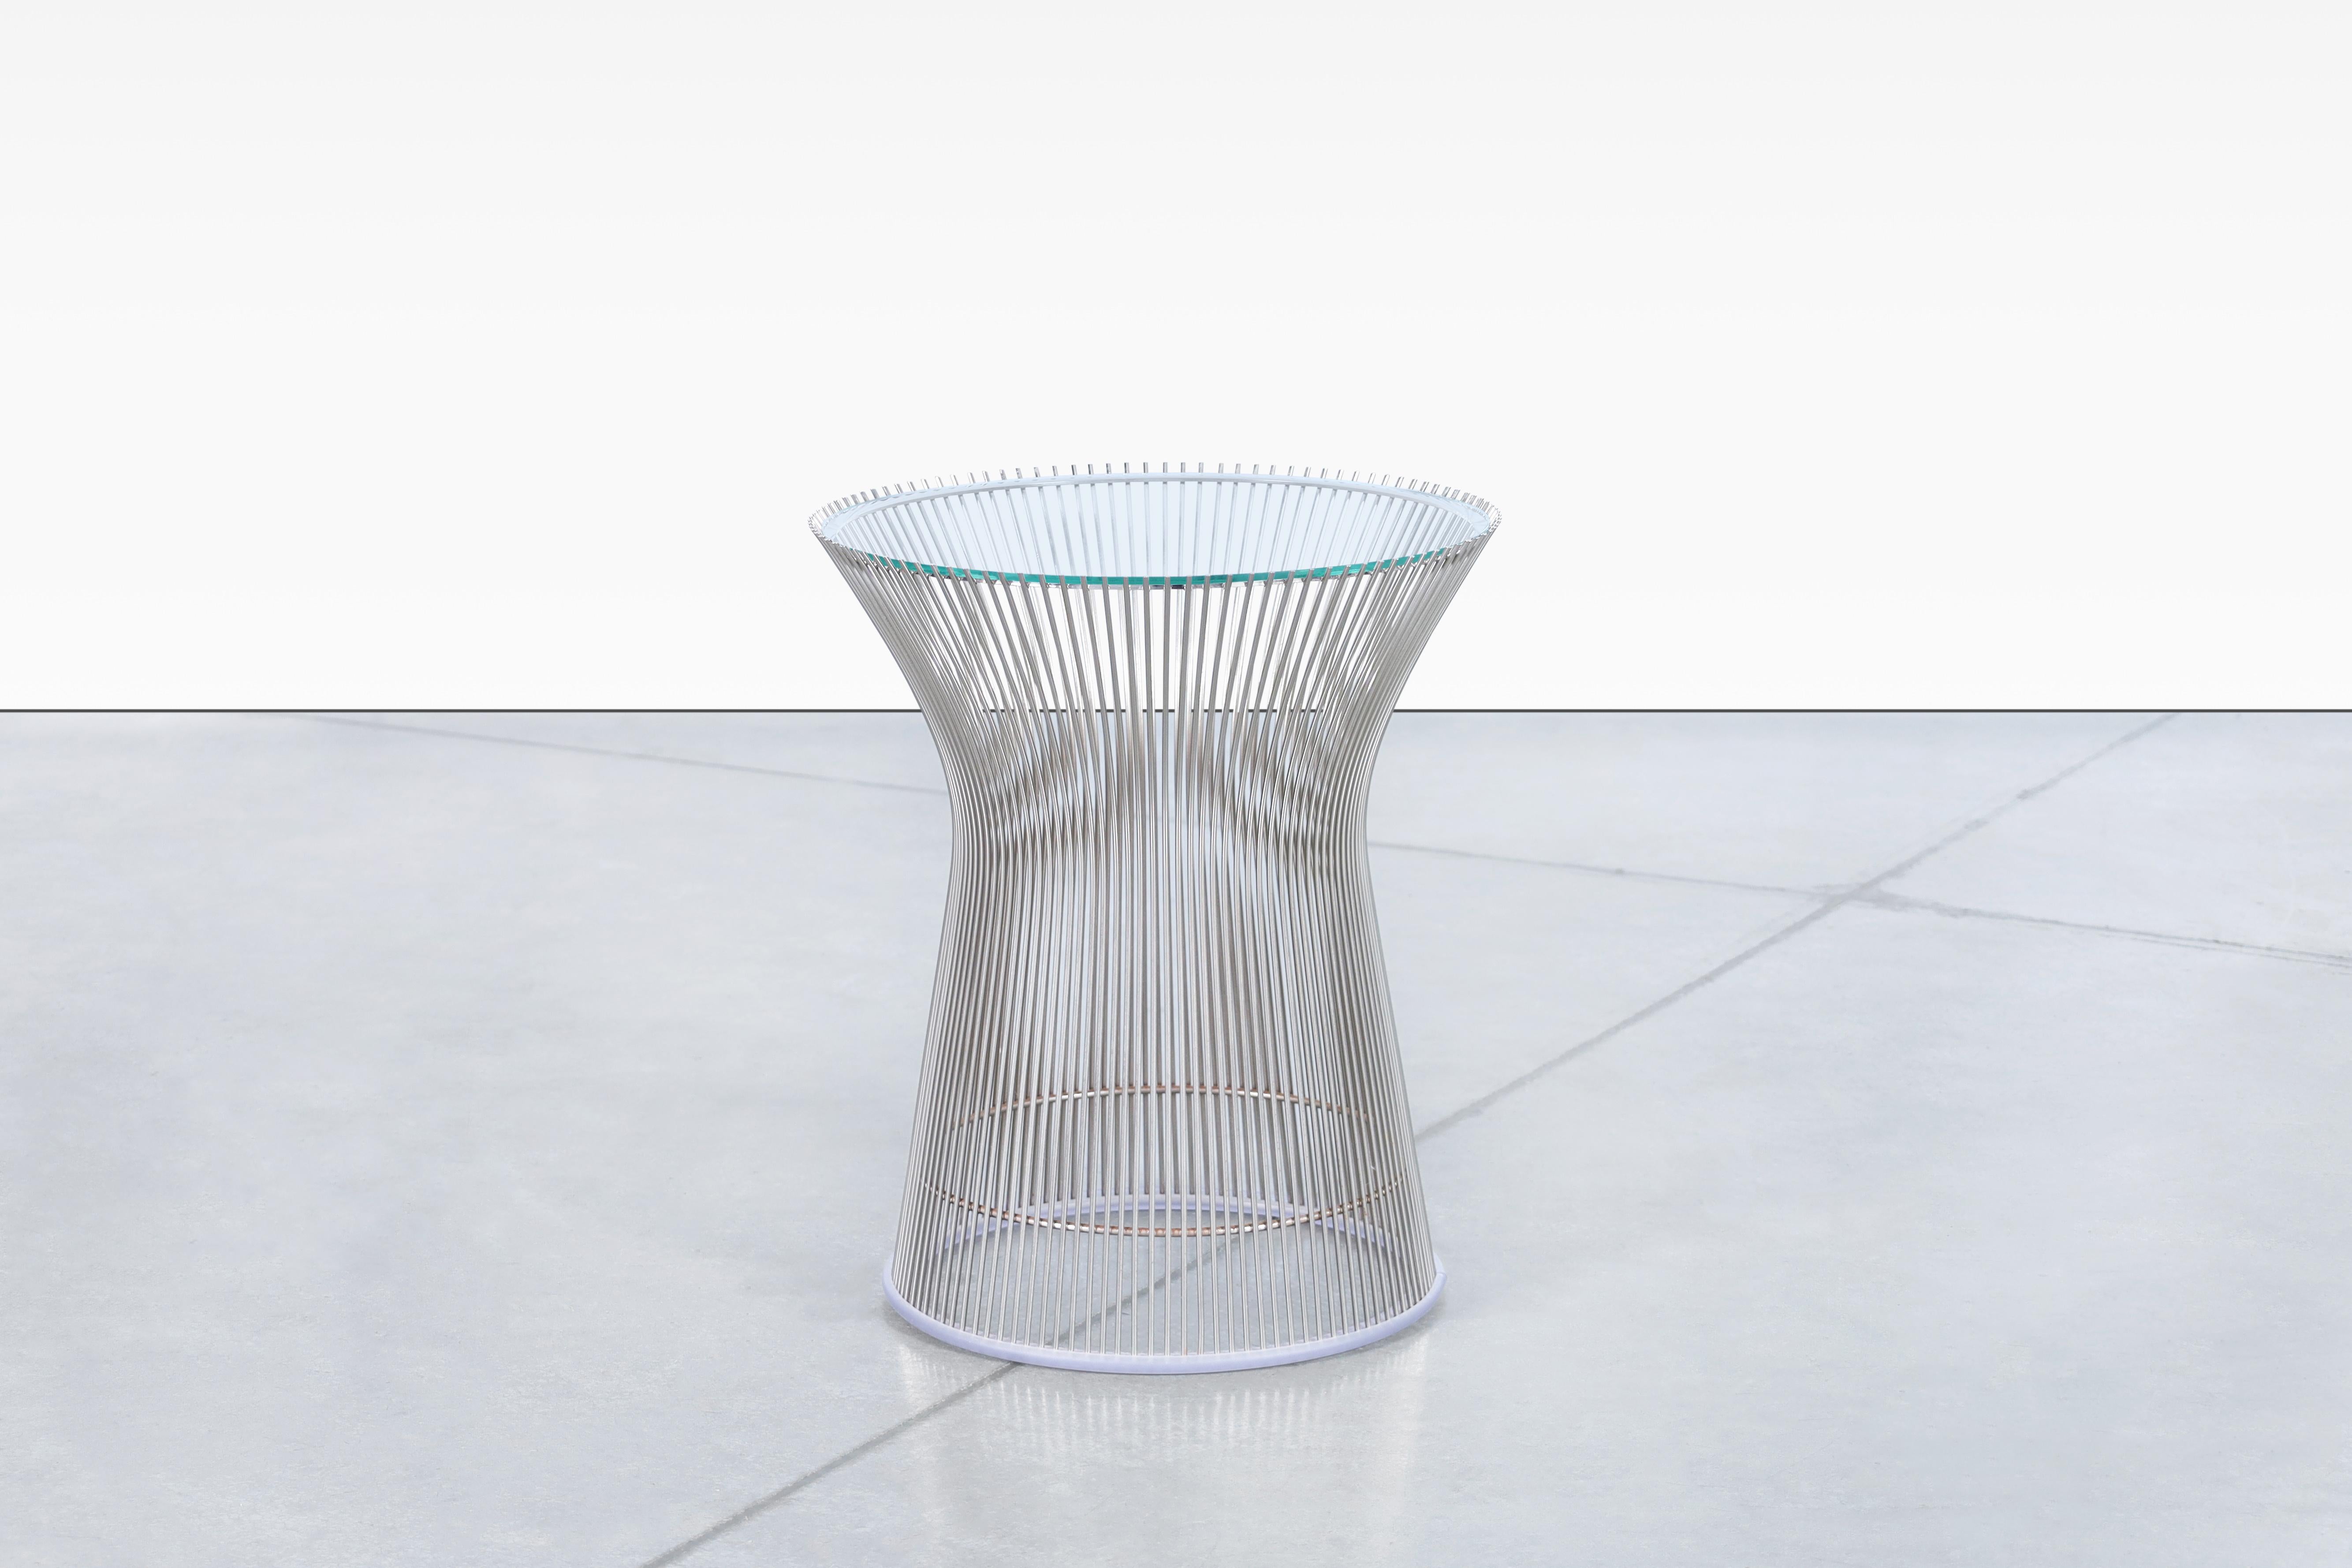 The polished nickel side table designed by Warren Platner and produced by Knoll is a stunning piece of furniture that is sure to impress. The table's intricate and eye-catching base is constructed with hundreds of curved steel rods that were